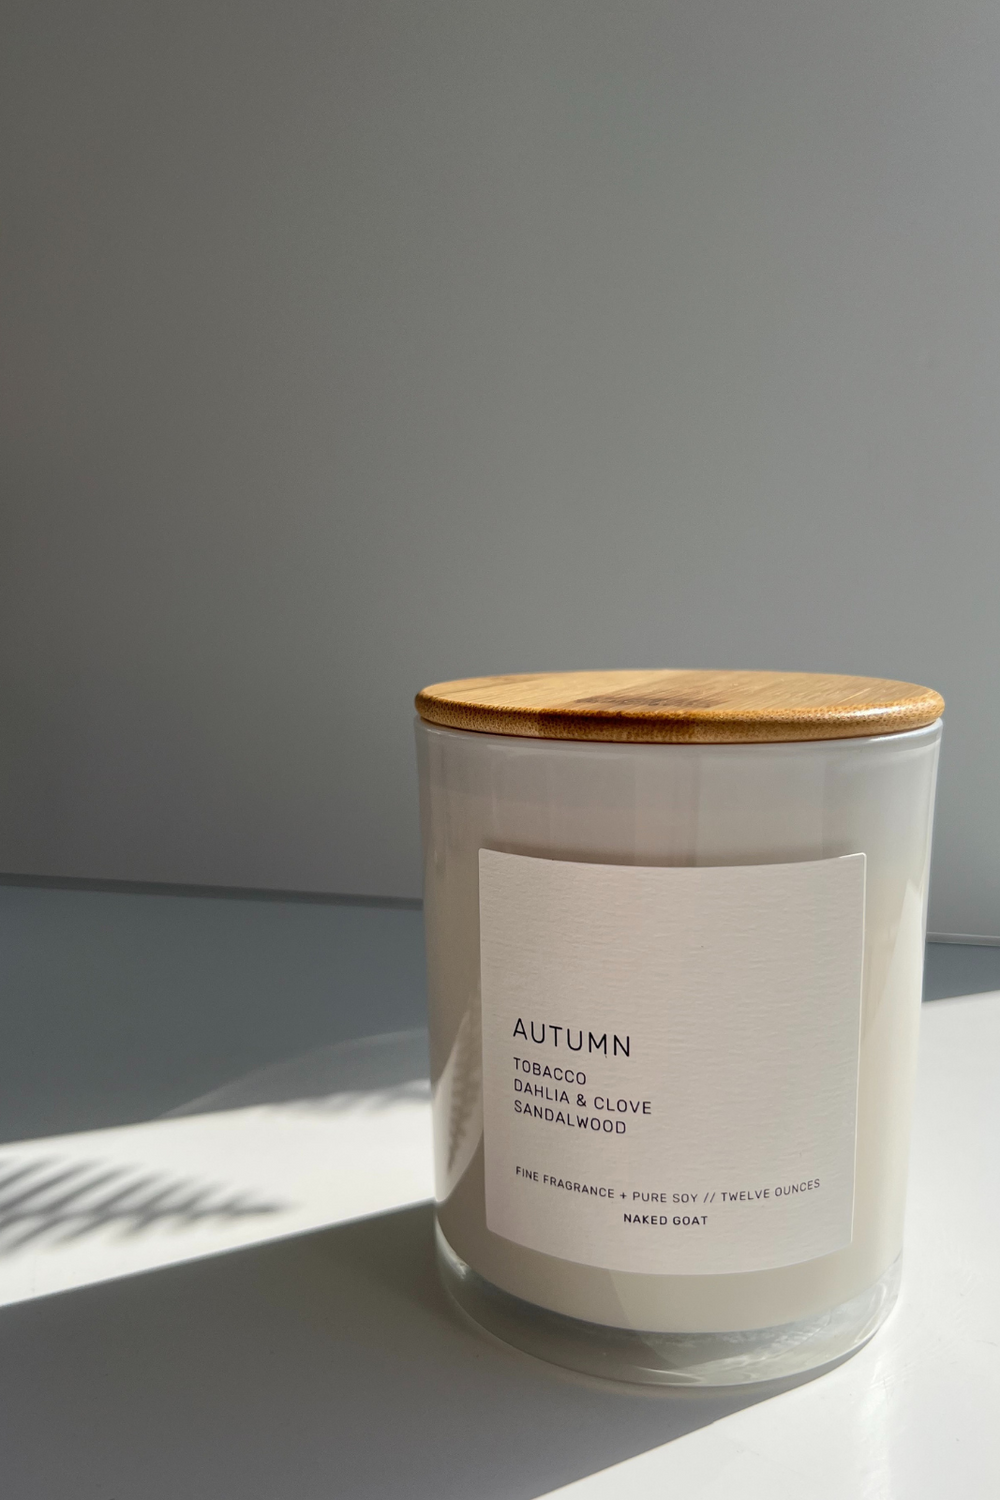 Limited Edition Autumn Candle